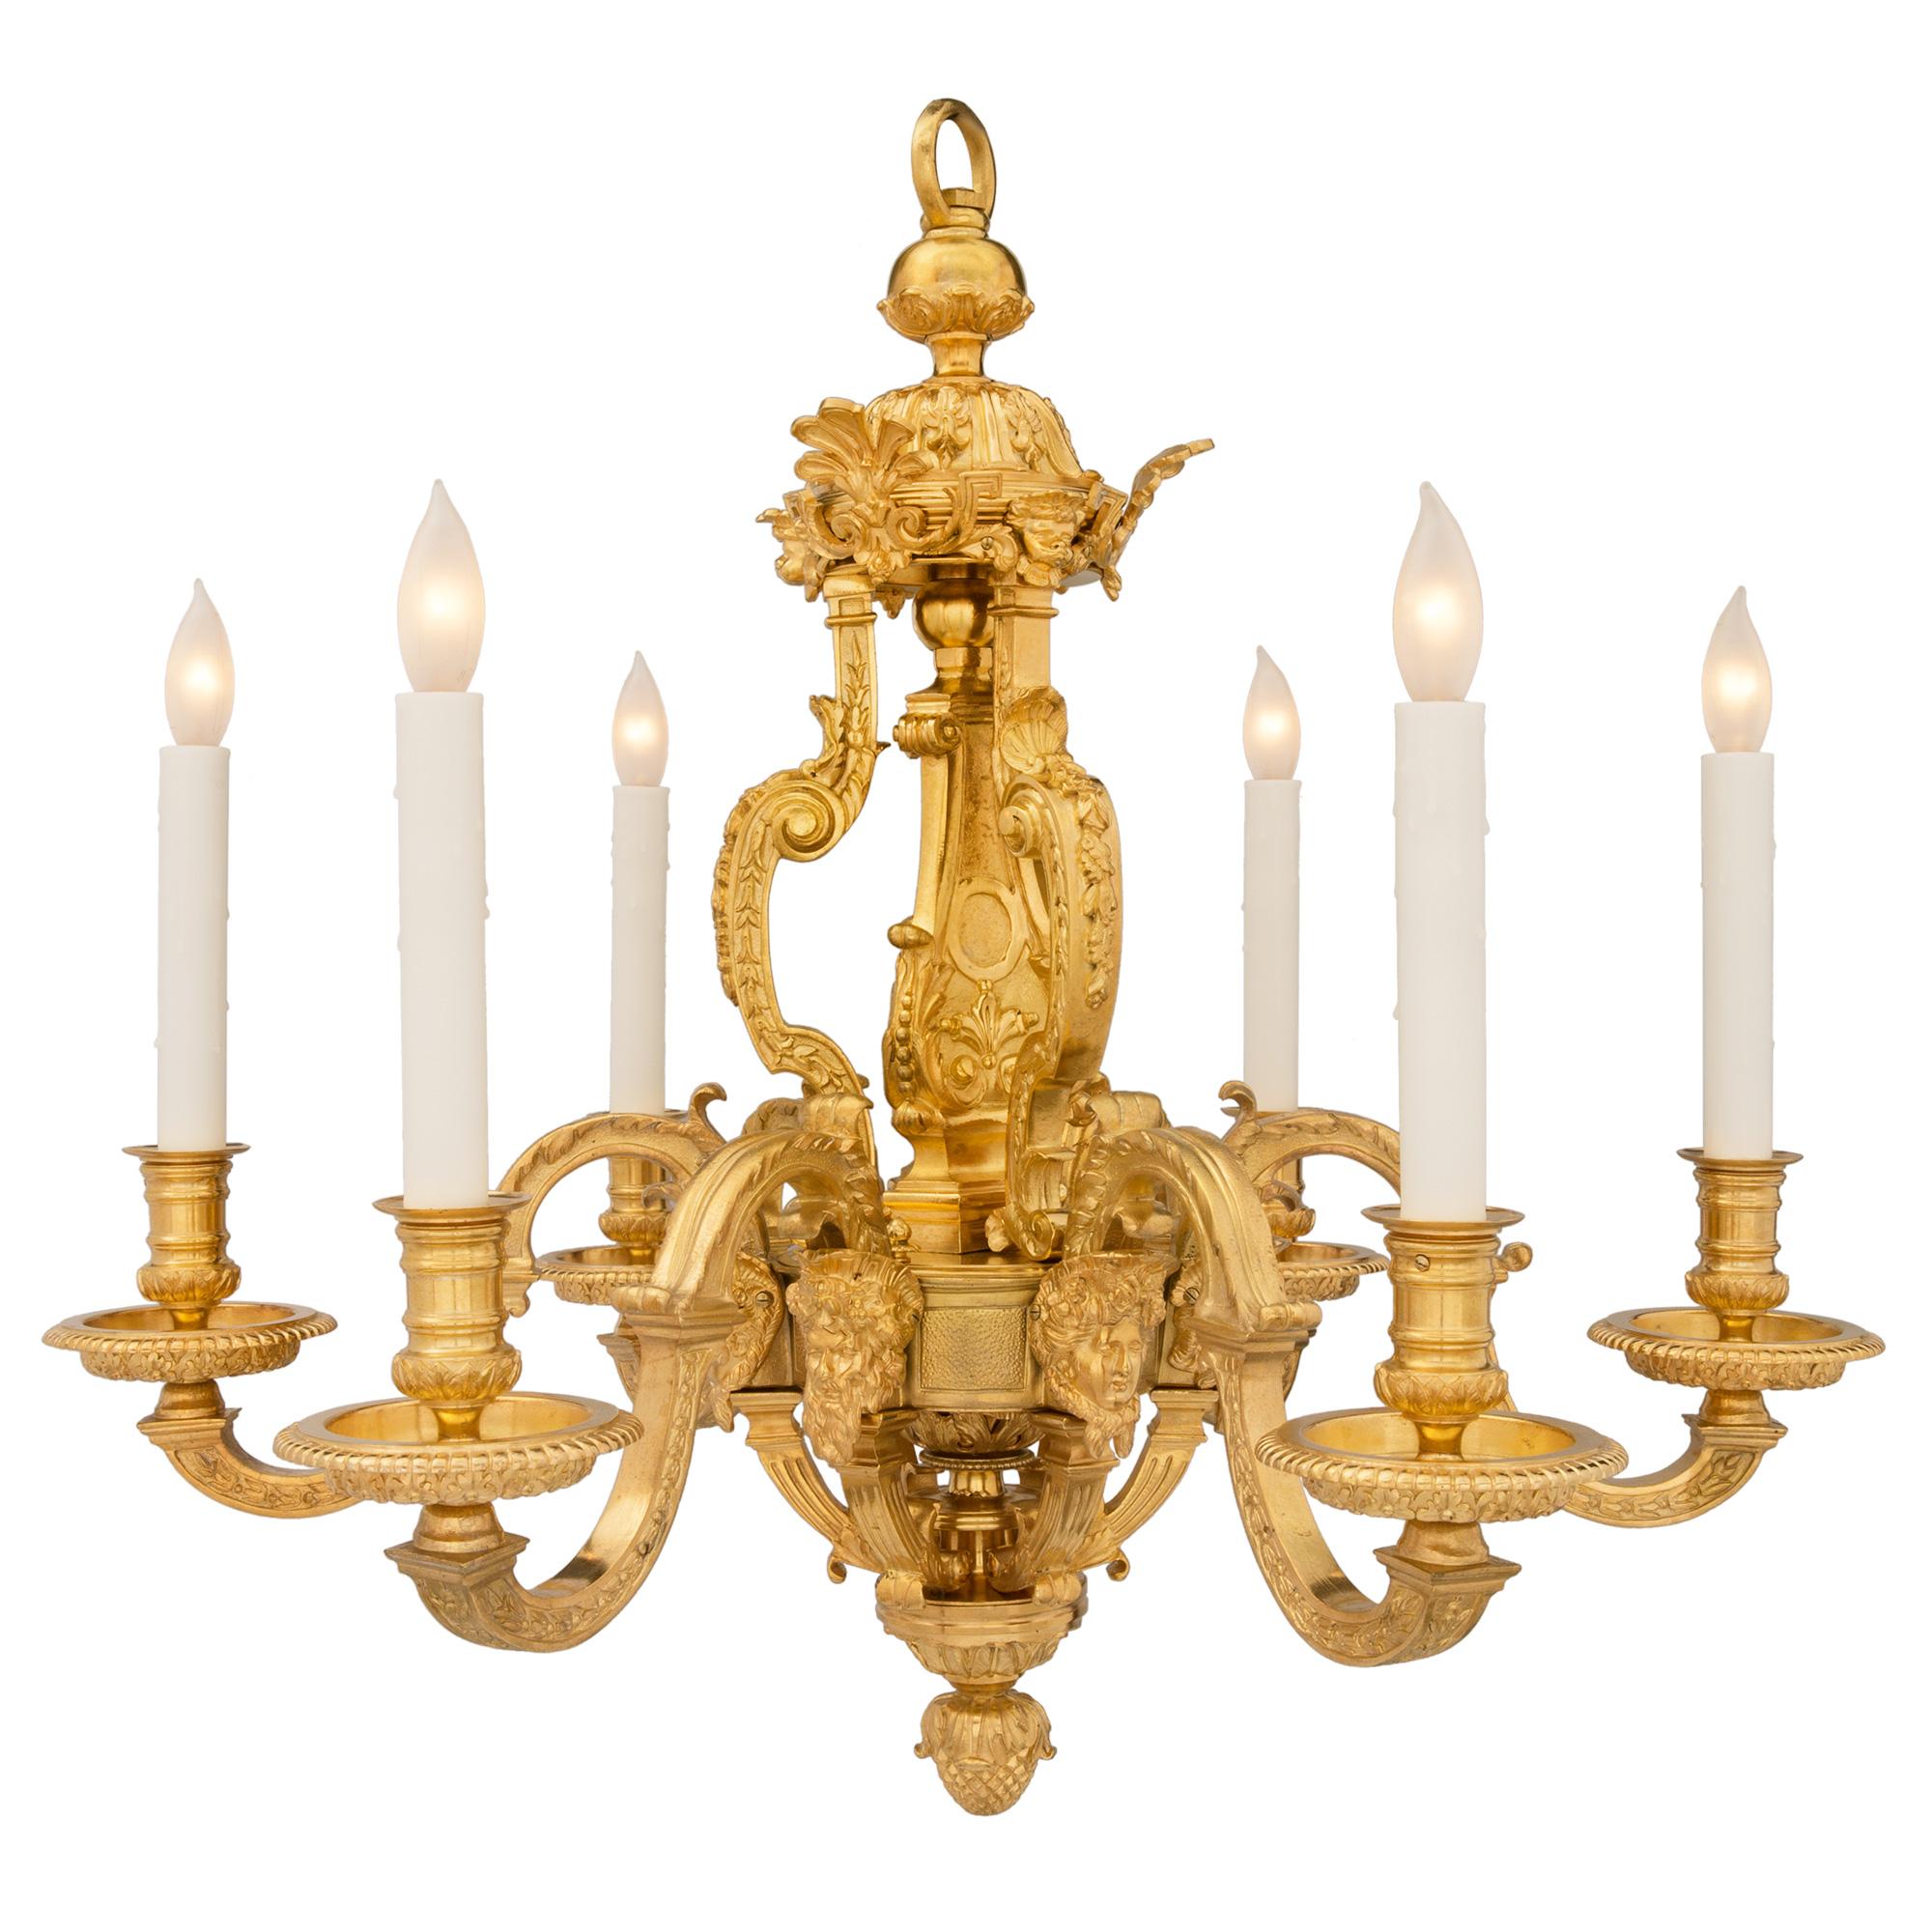 French 19th Century Louis XIV Style Ormolu Six-Arm Chandelier In Good Condition For Sale In West Palm Beach, FL